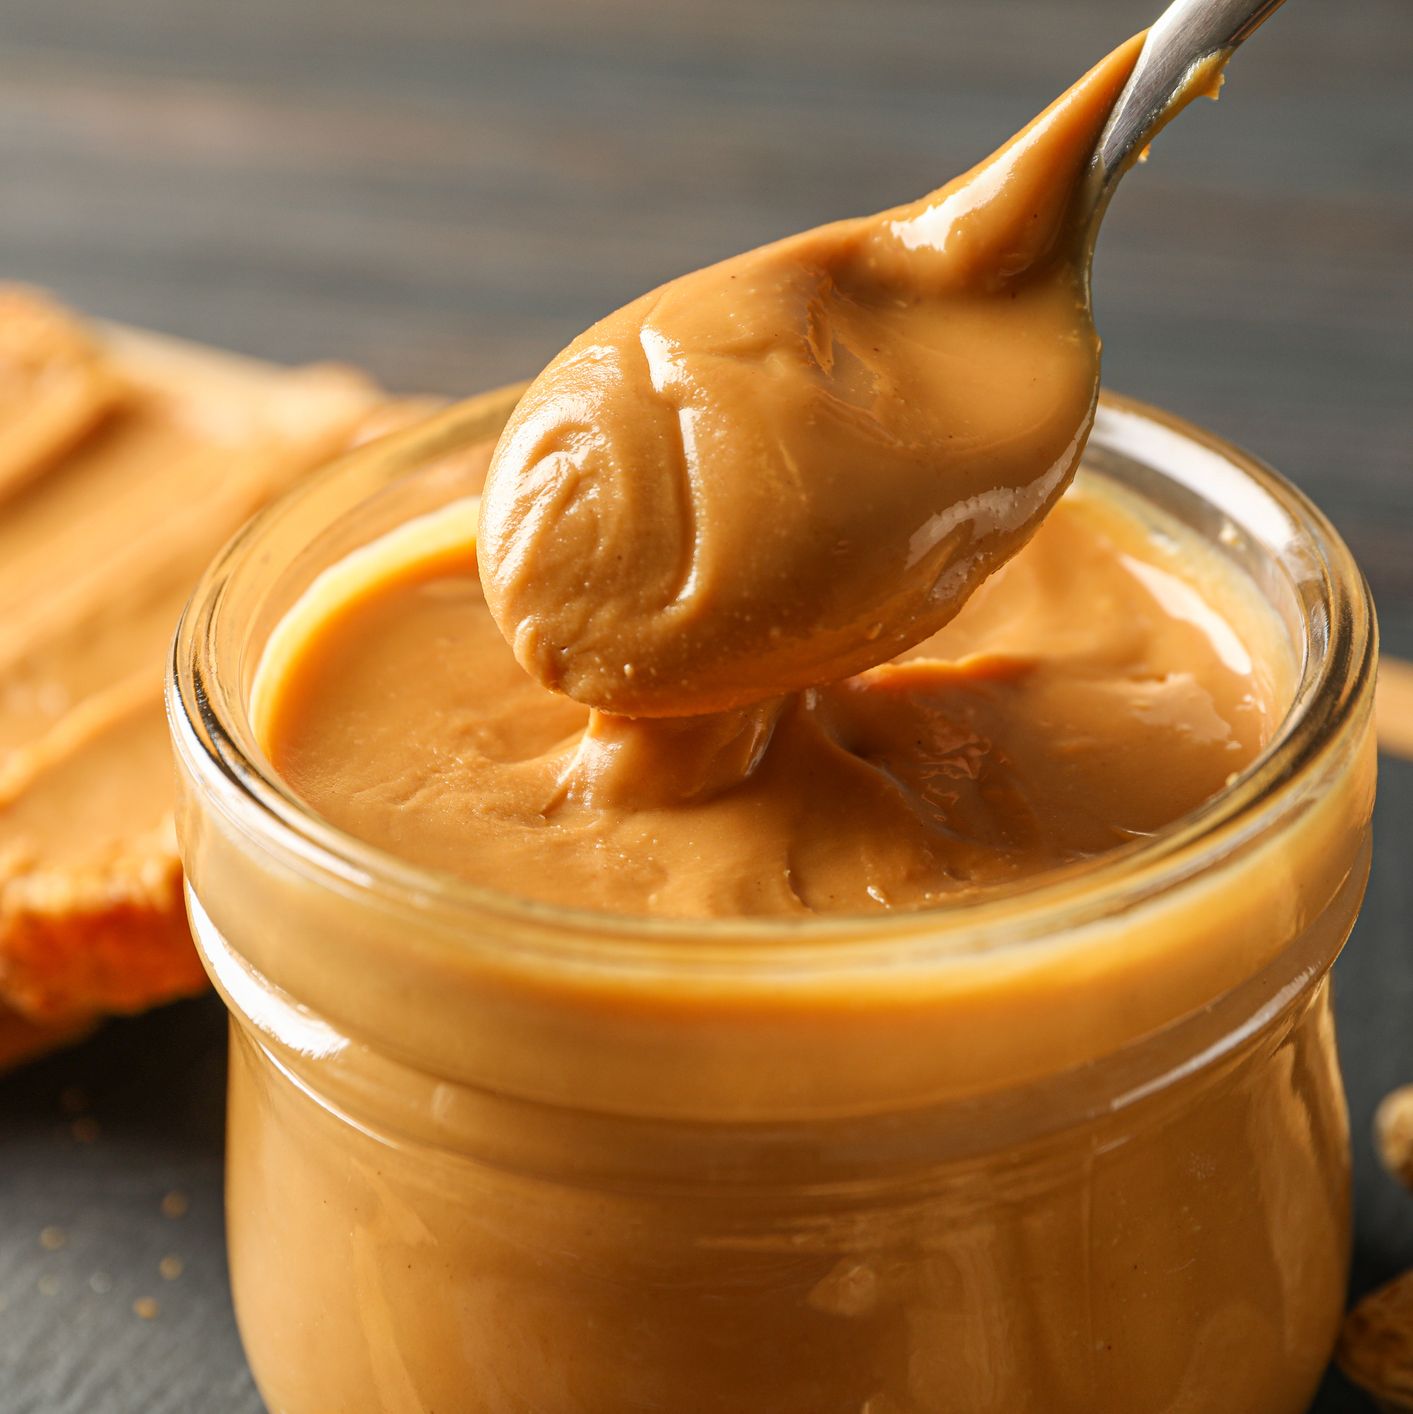 PSA: You May Not Be Eating Real Peanut Butter